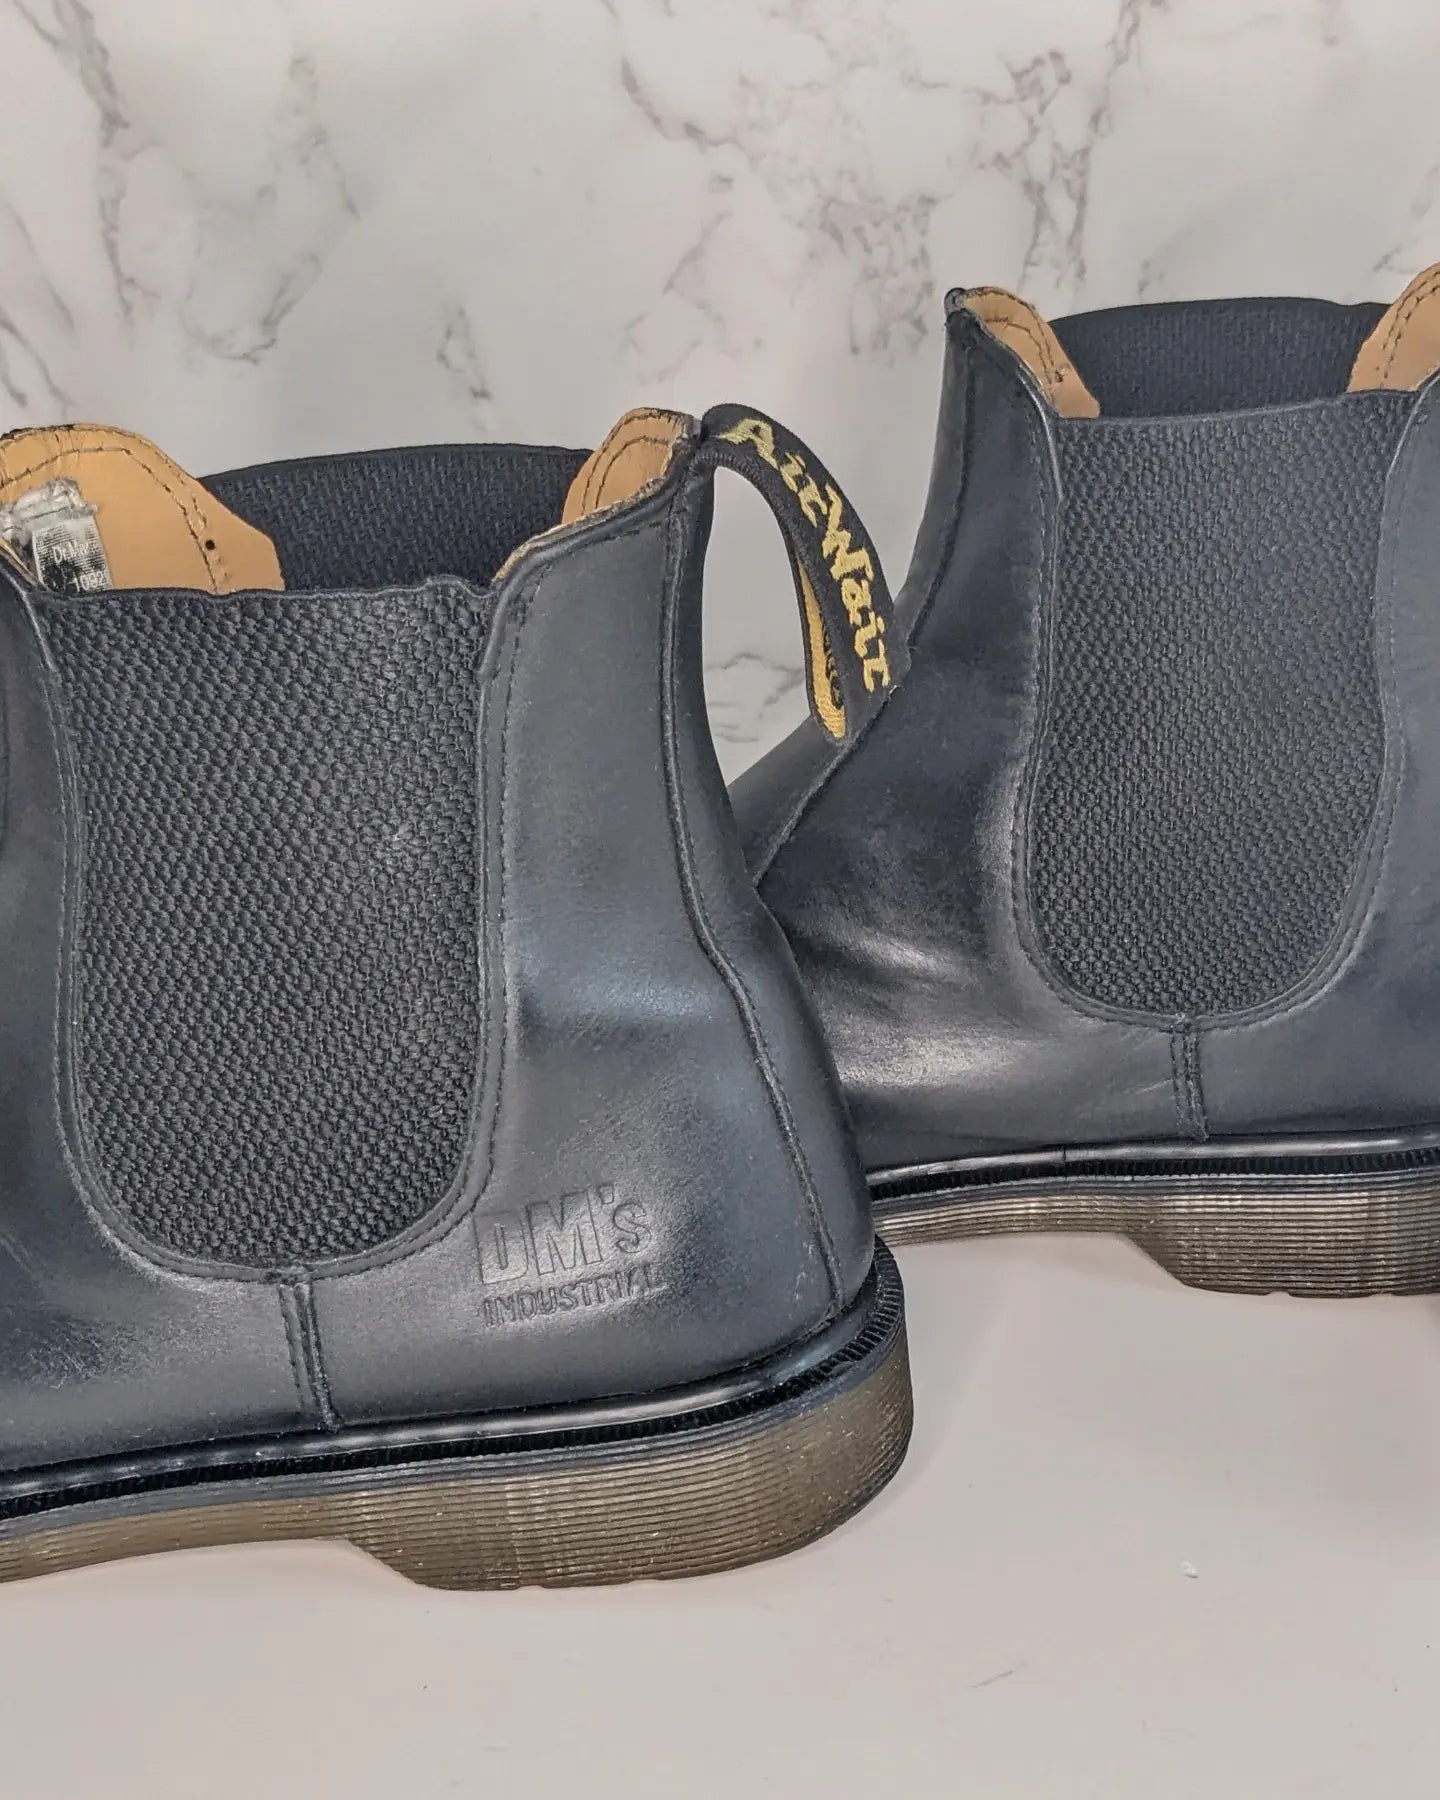 Dr. Martens Industrial Smooth Leather Chelsea Boot Black US Size 11